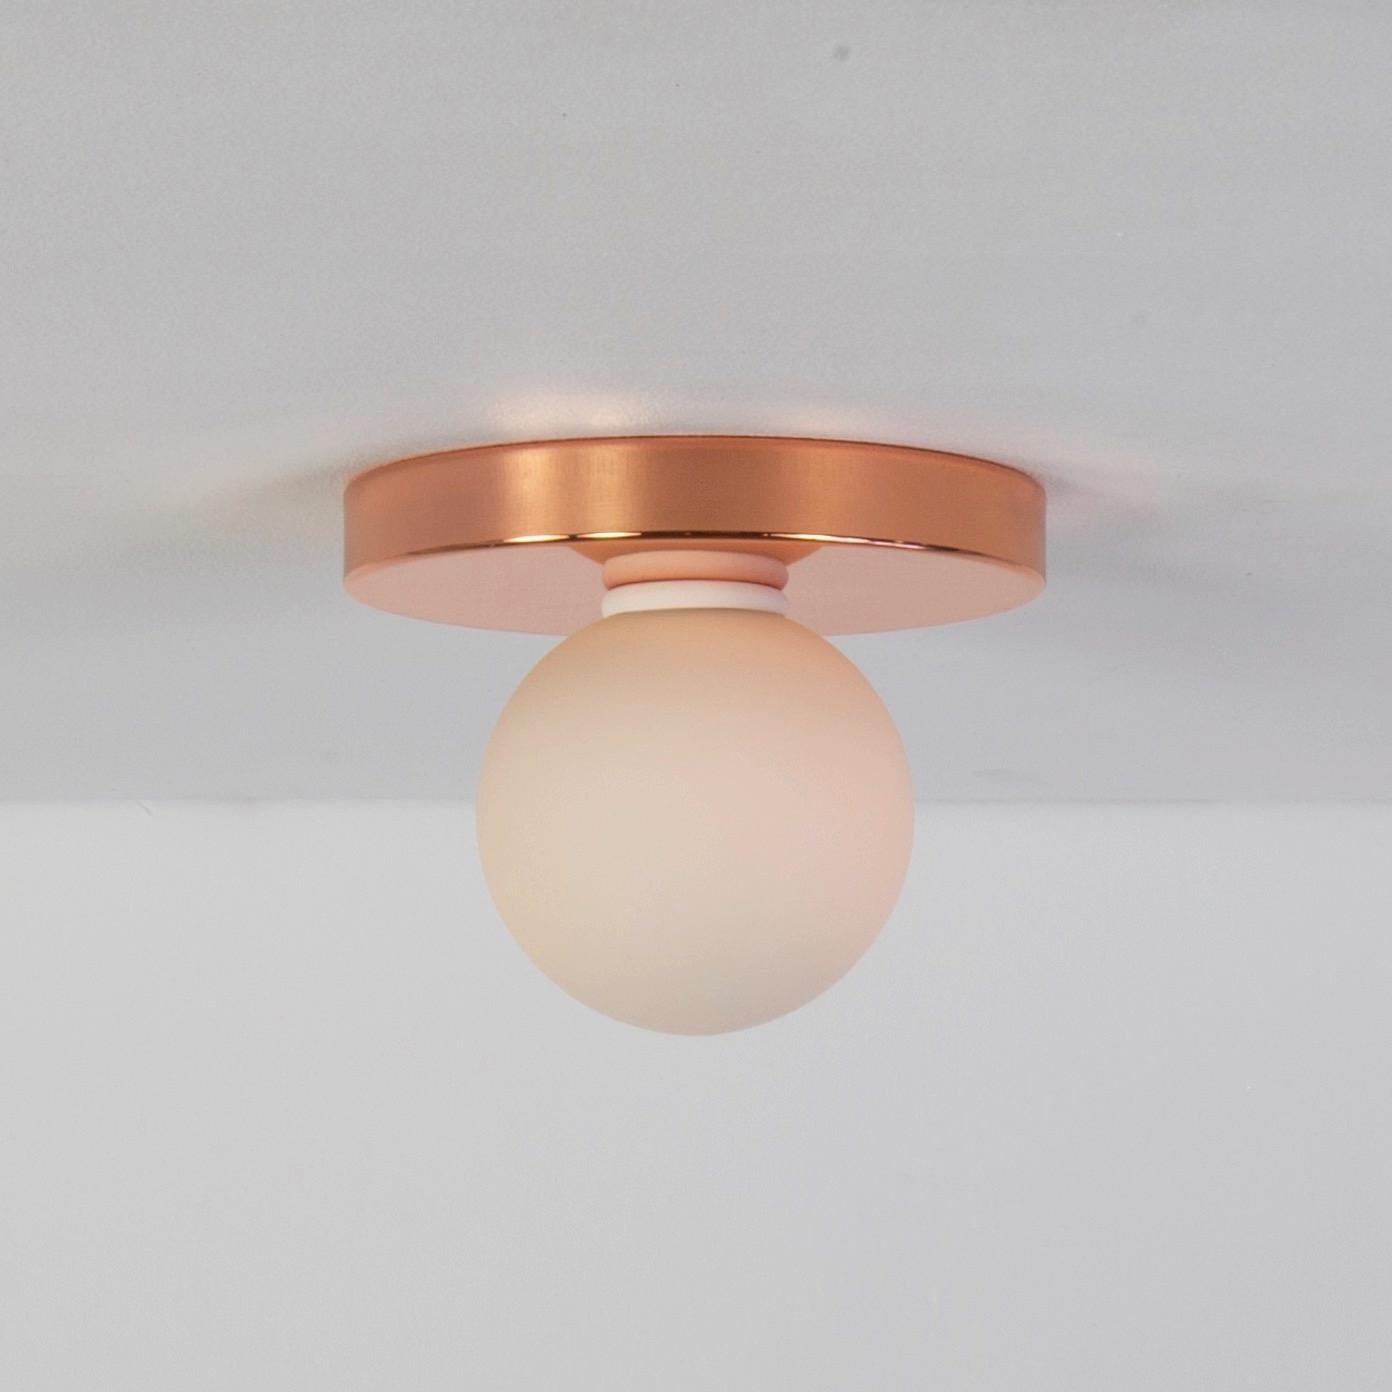 American Set of 4 Globe Flush Mounts by Research.Lighting, Copper, Made to Order For Sale